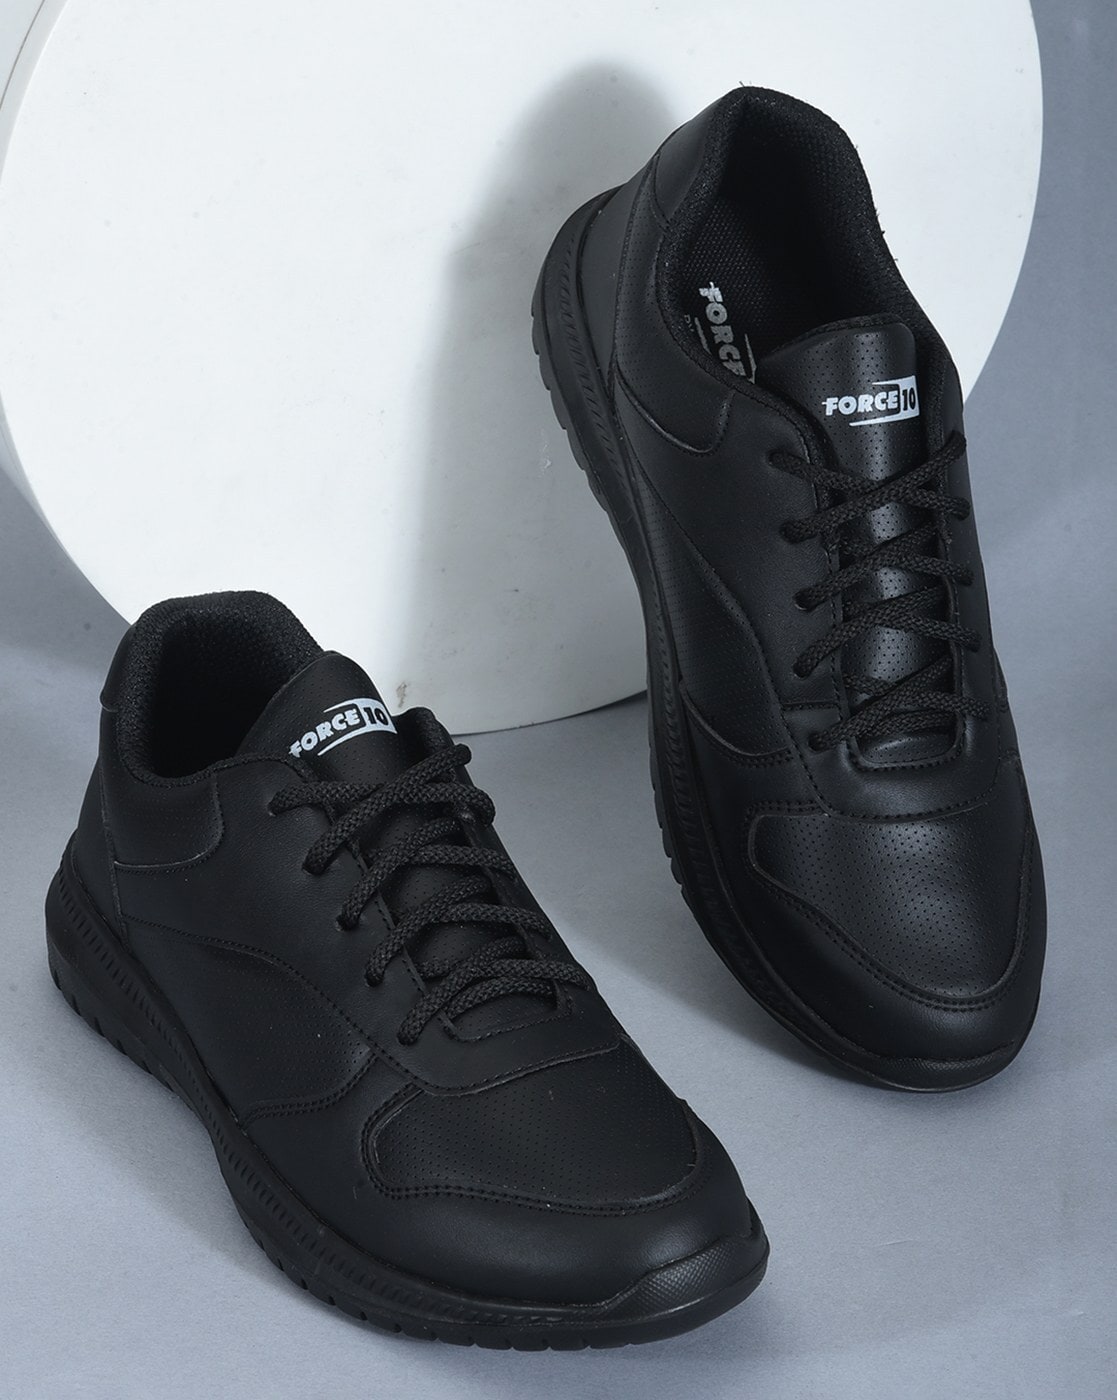 School Shoes & Trainers | Black School Shoes | George at ASDA